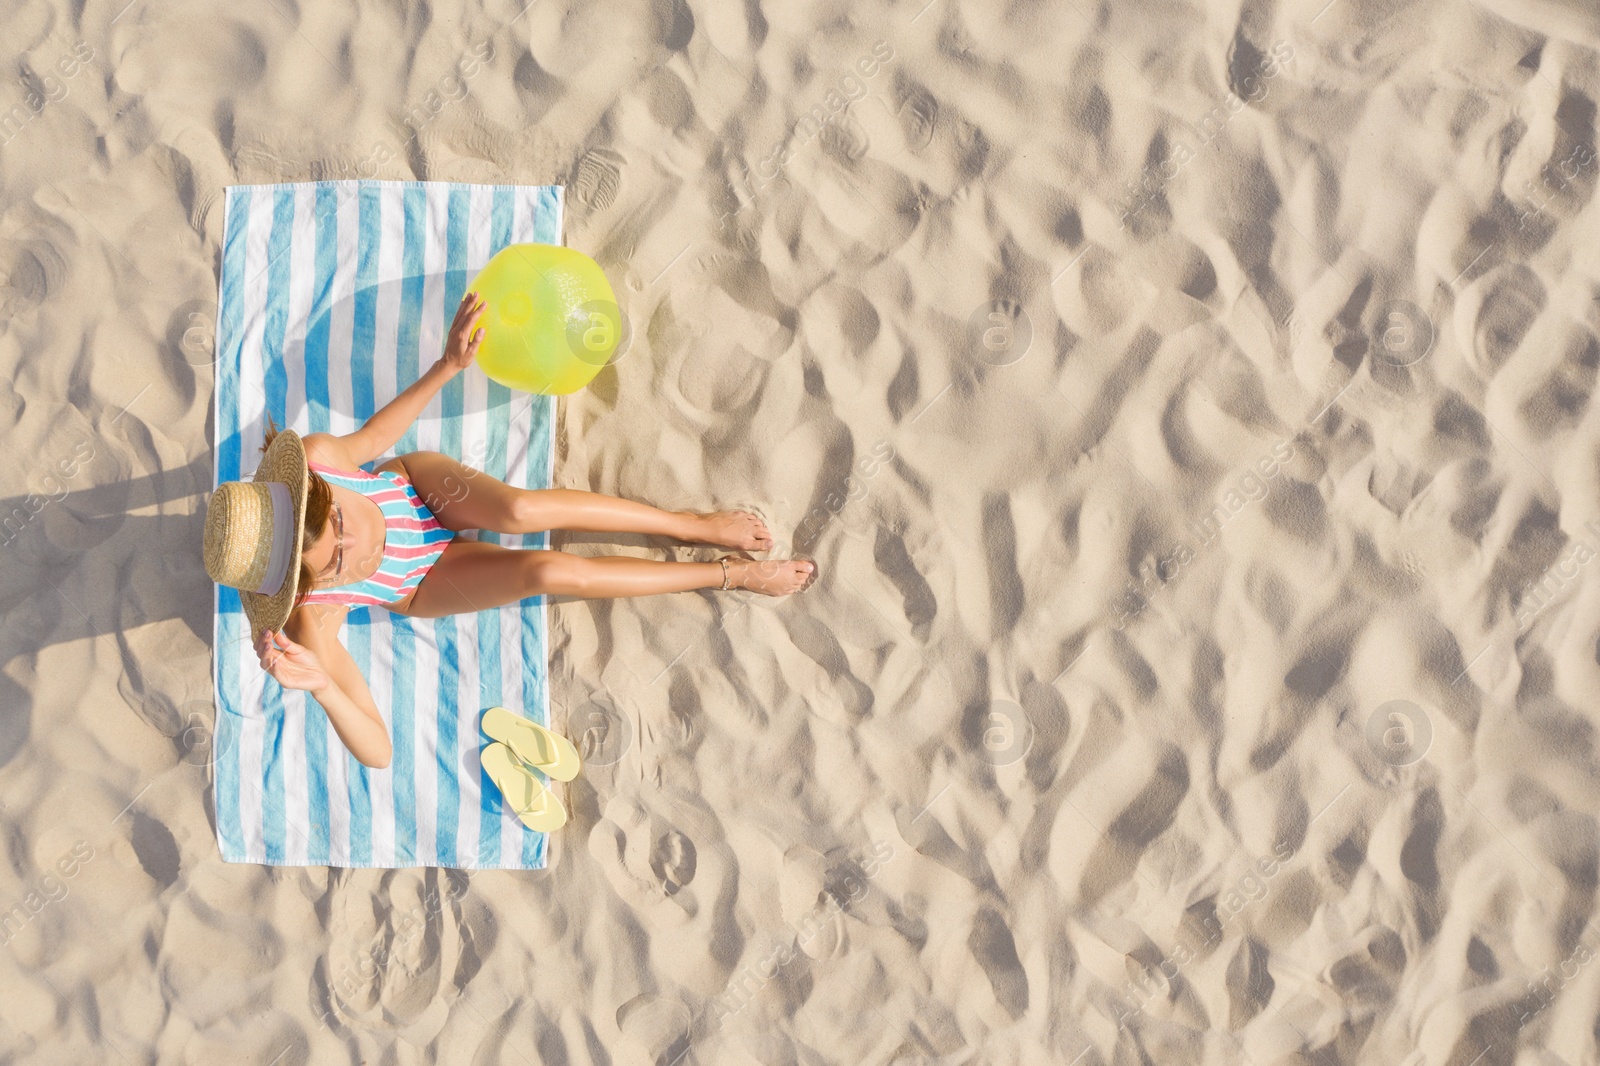 Image of Woman sunbathing on beach towel at sandy coast, aerial view. Space for text